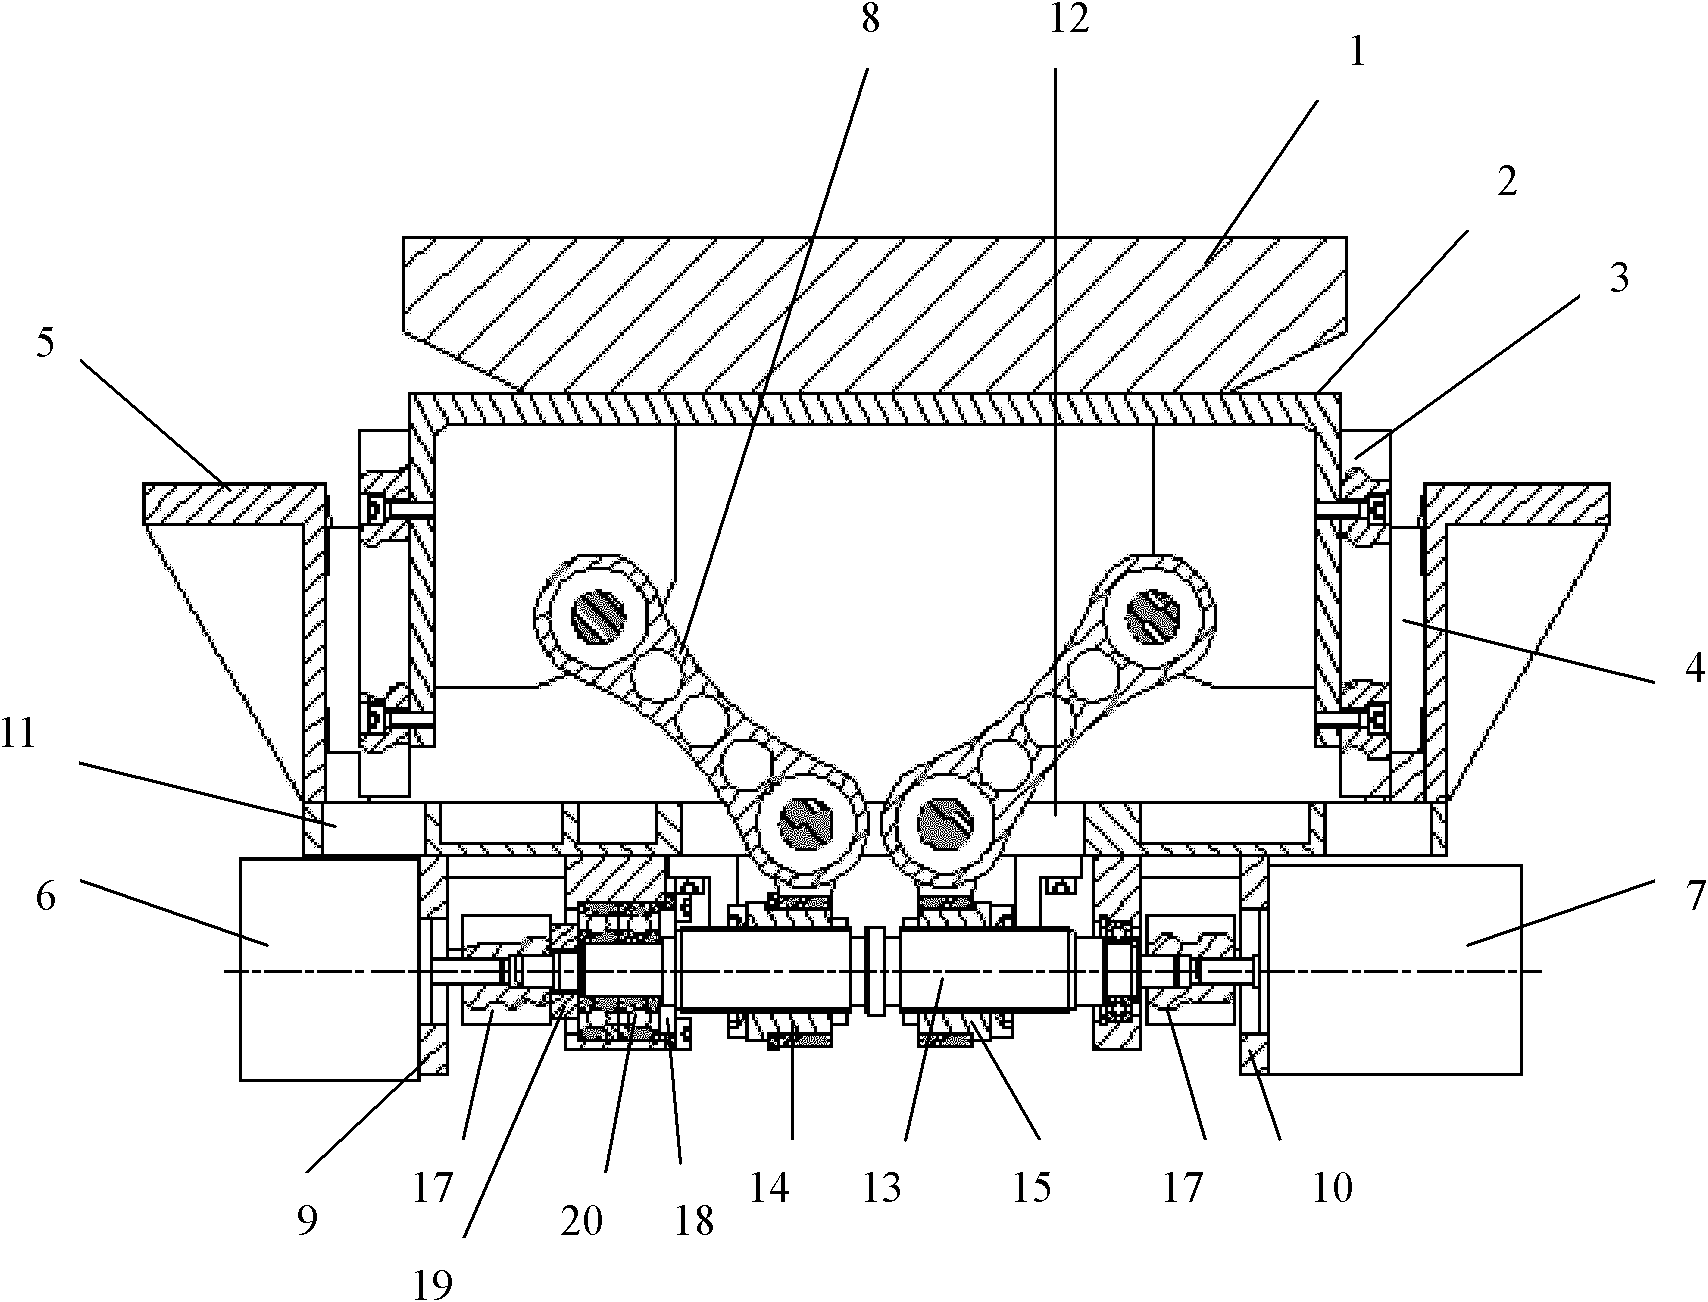 Positive and negative helical focusing mechanism